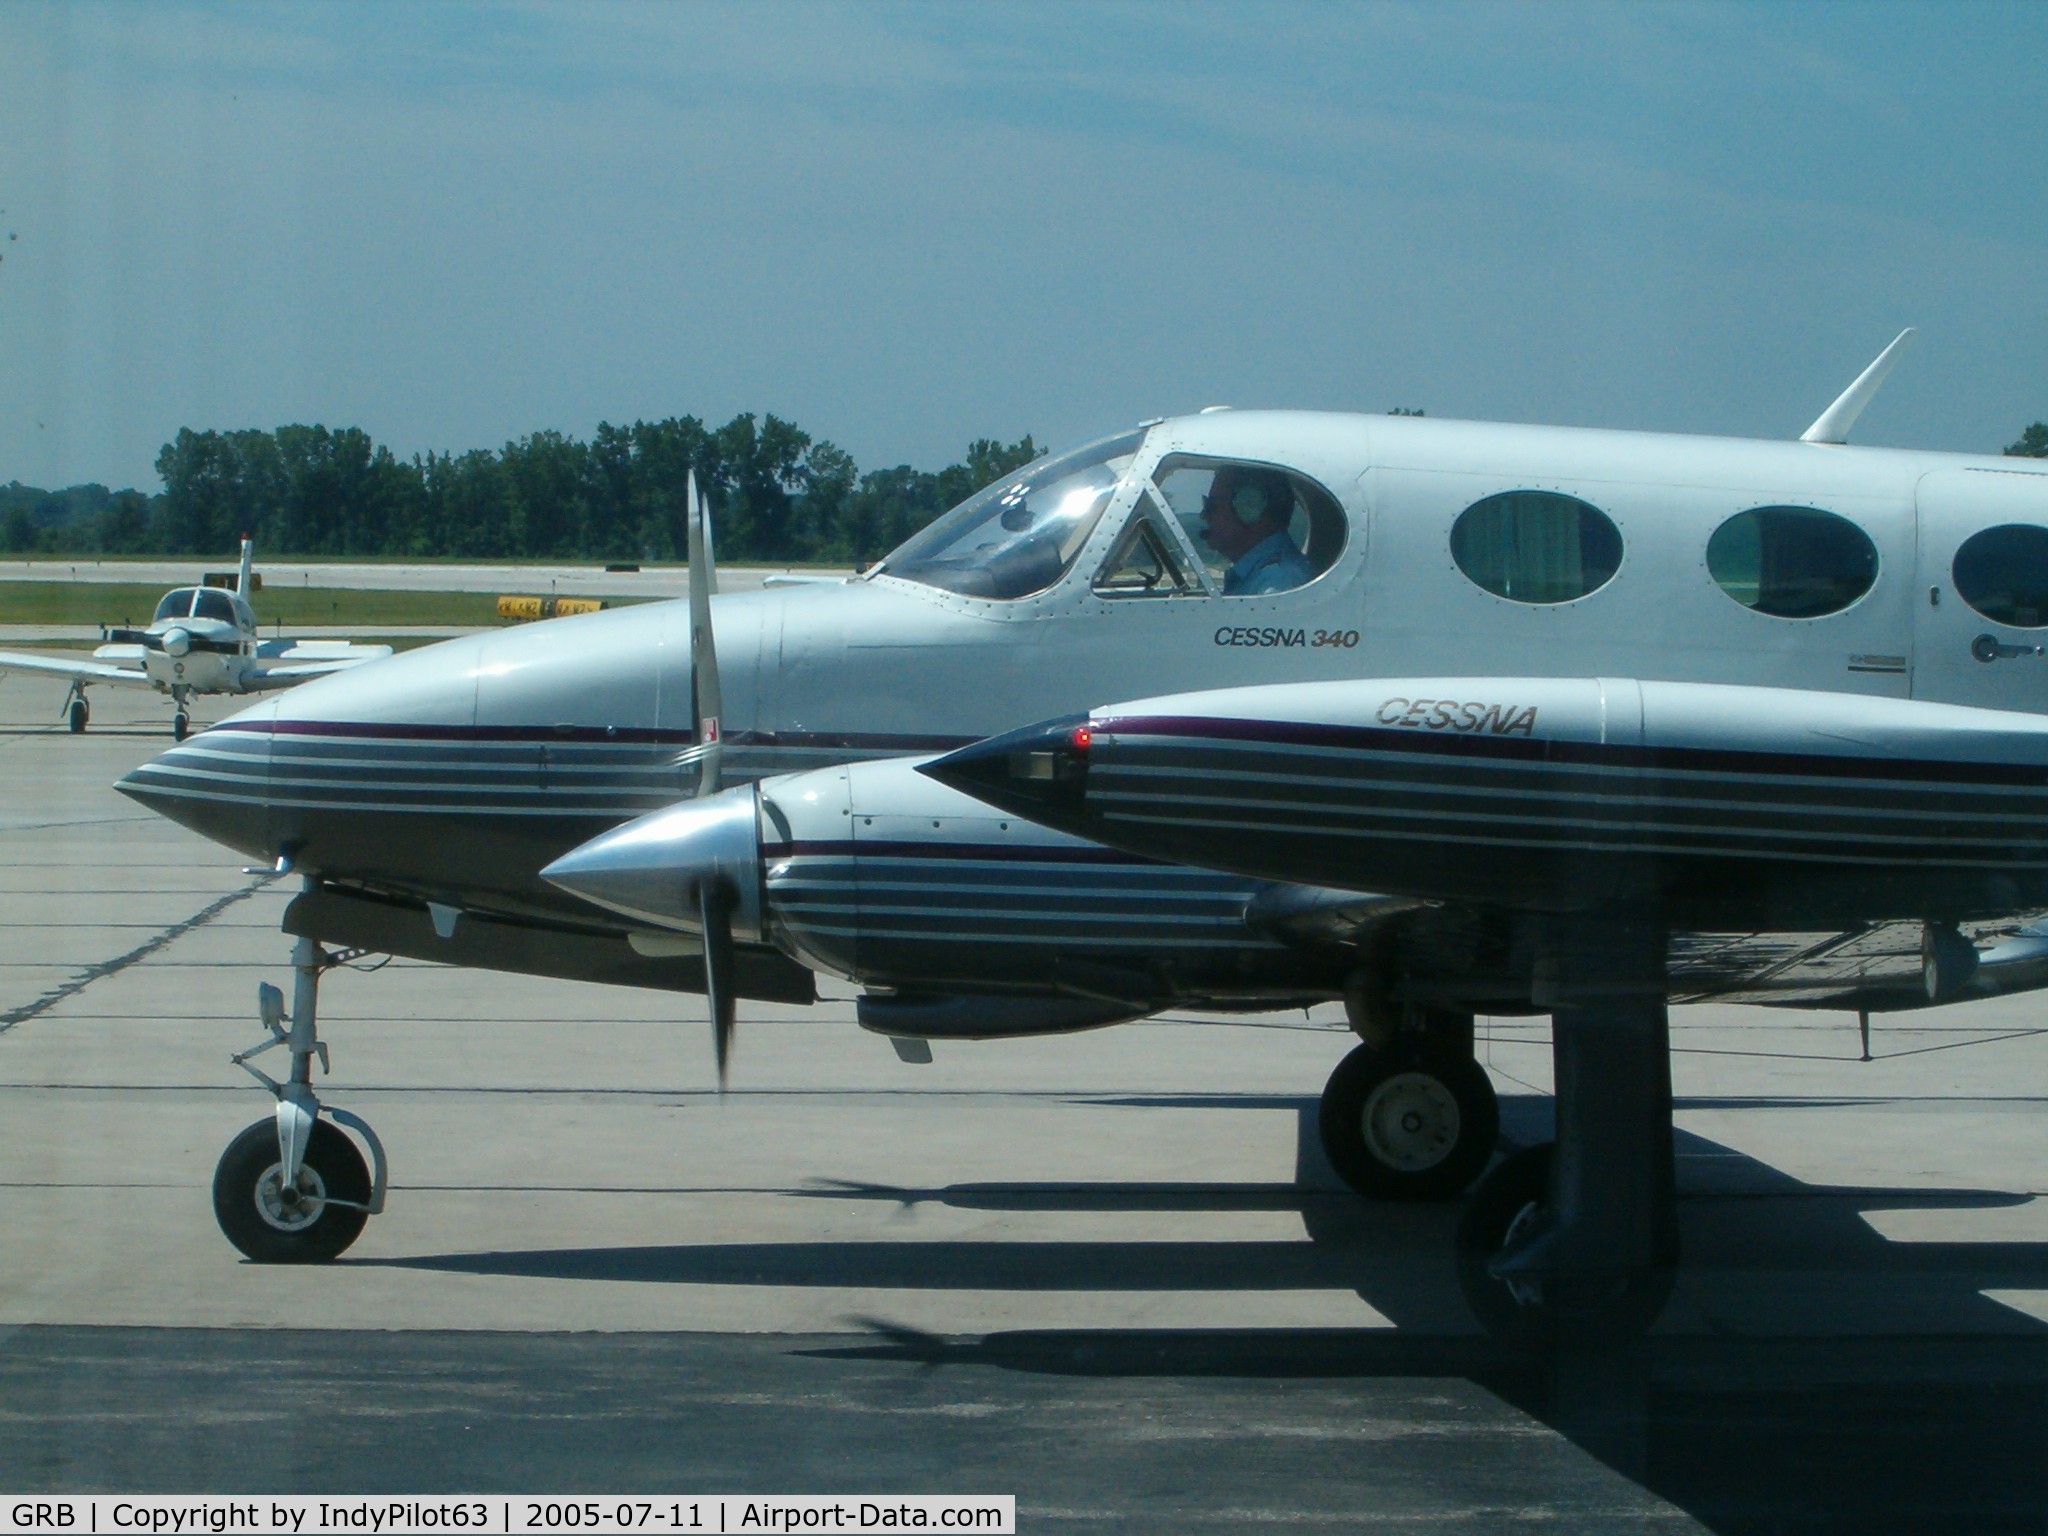 Austin Straubel International Airport (GRB) - A Cessna 340 taxiing on the tarmac at Green Bay.